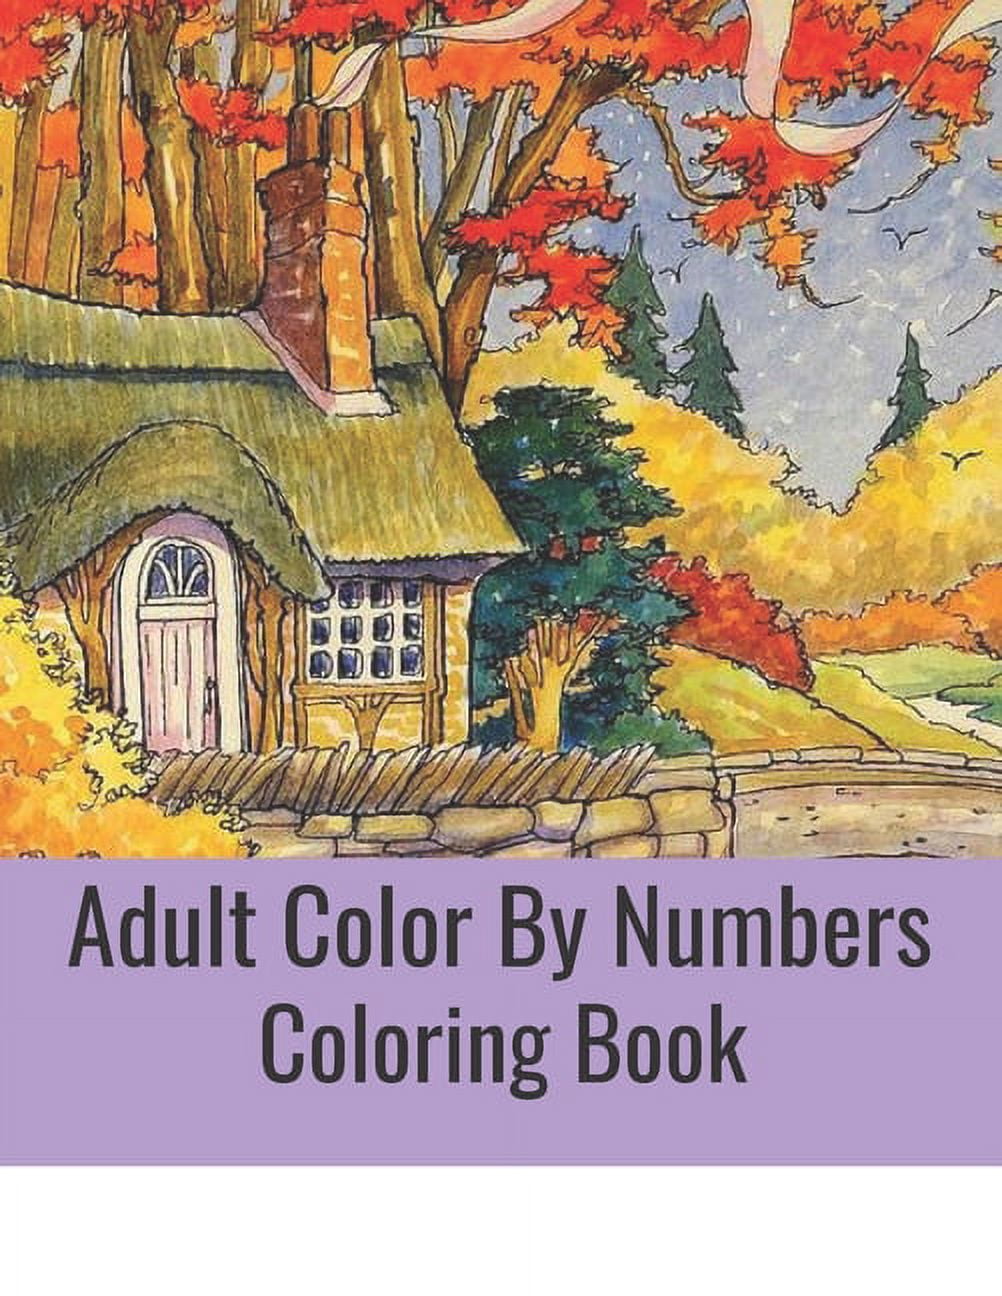 Large Print Color By Number Coloring Book: Easy Large Print Color By Number  Coloring Book With Birds, Flowers, Animals Gardens, Landscapes(adults